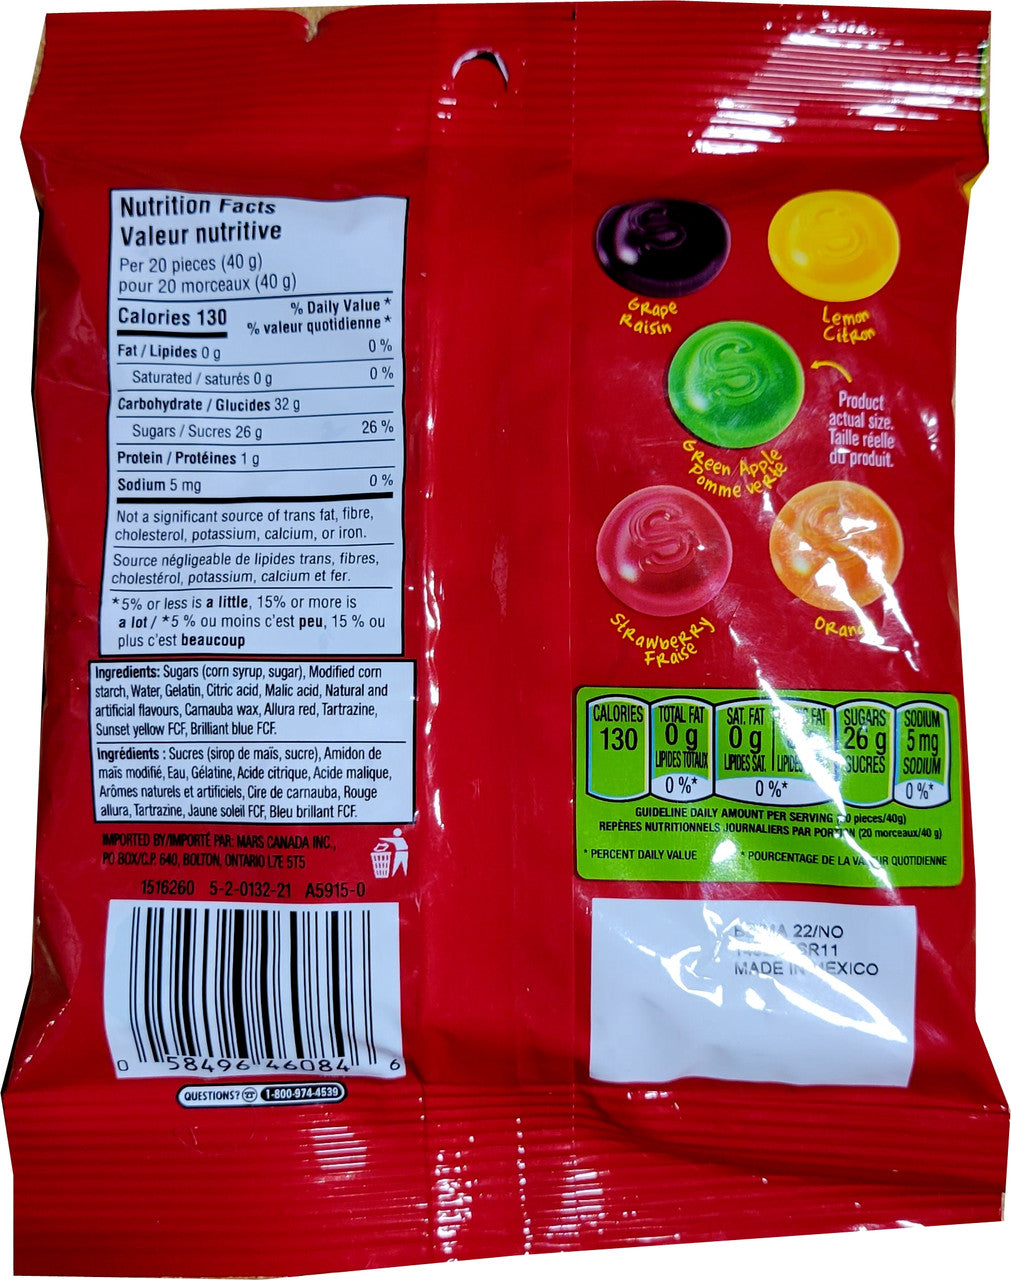 Skittles Gummies Original, 164g/5.7oz {Imported from Canada}